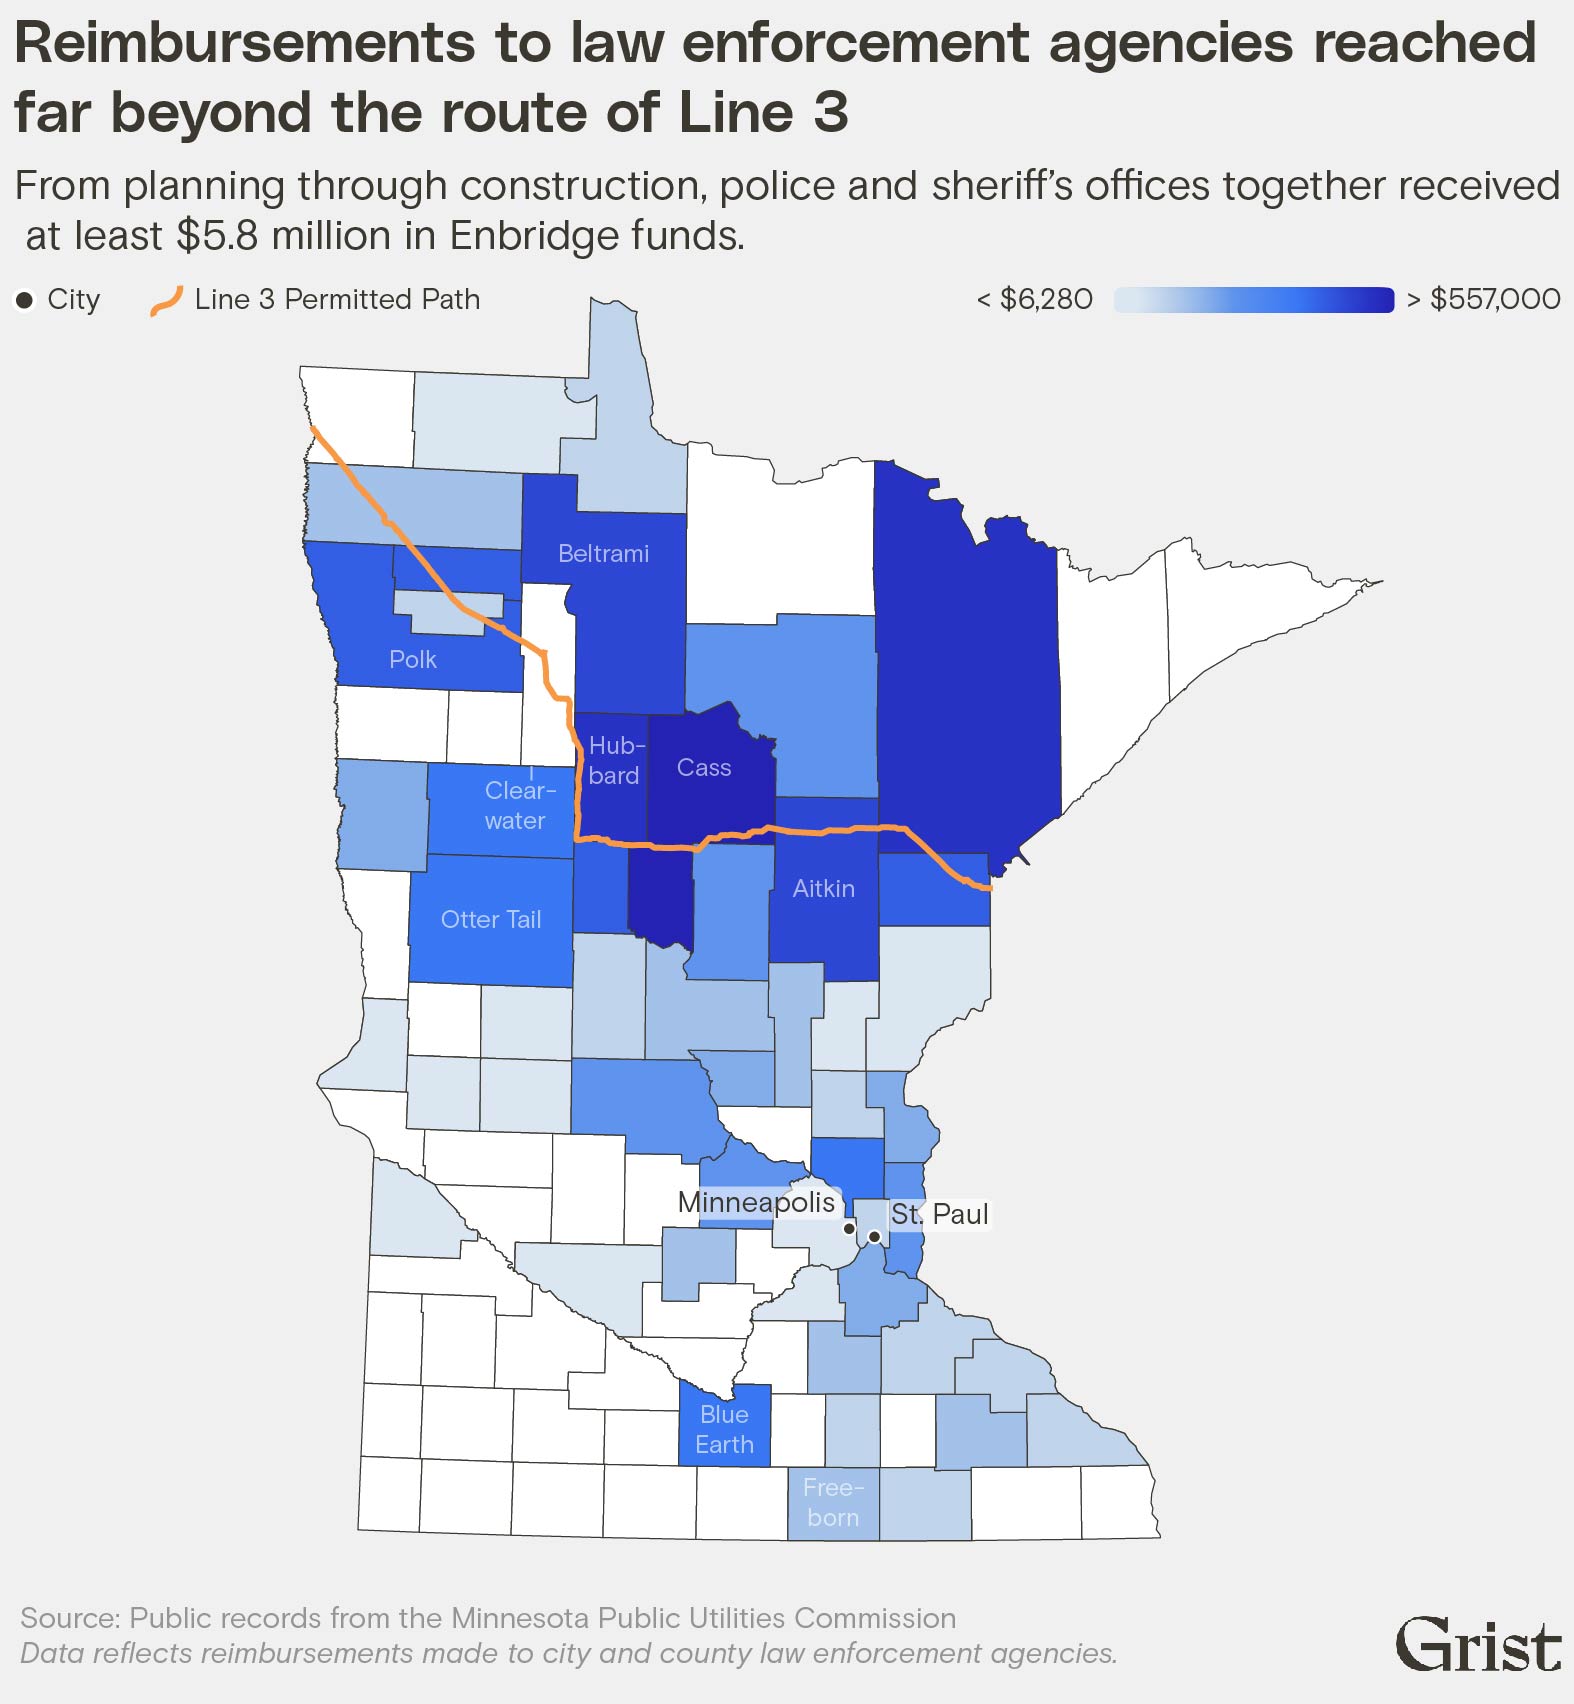 A choropleth map of Minnesota shows counties where Enbridge invested the most in local law enforcement. Some counties are in the southern part of the state, far from the route of Line 3.